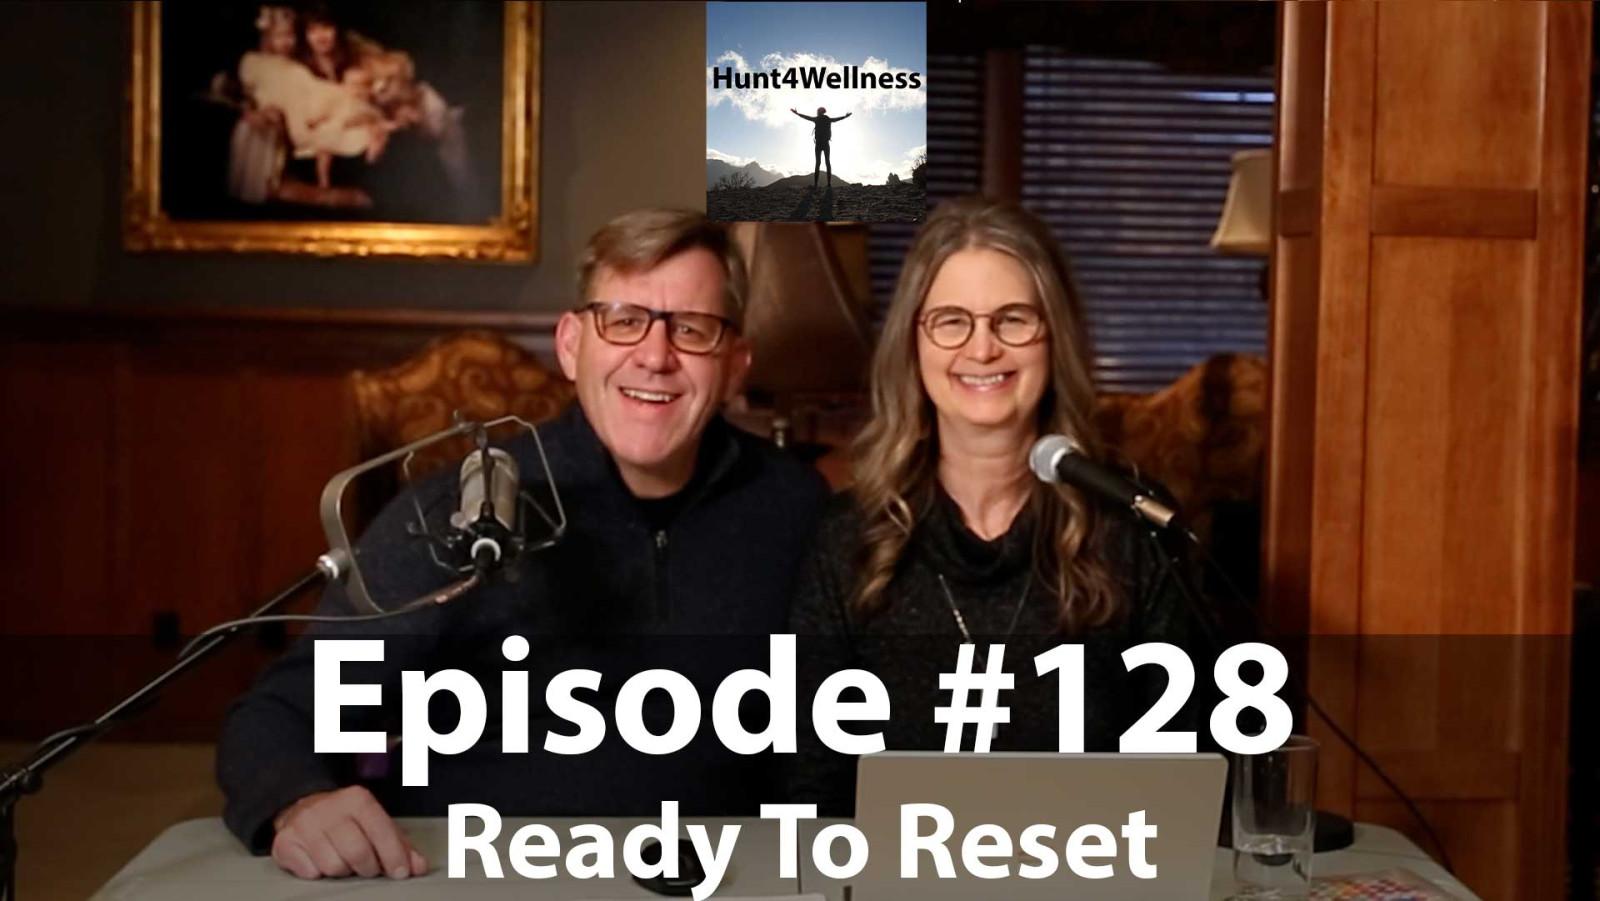 Episode #128 - Ready To Reset